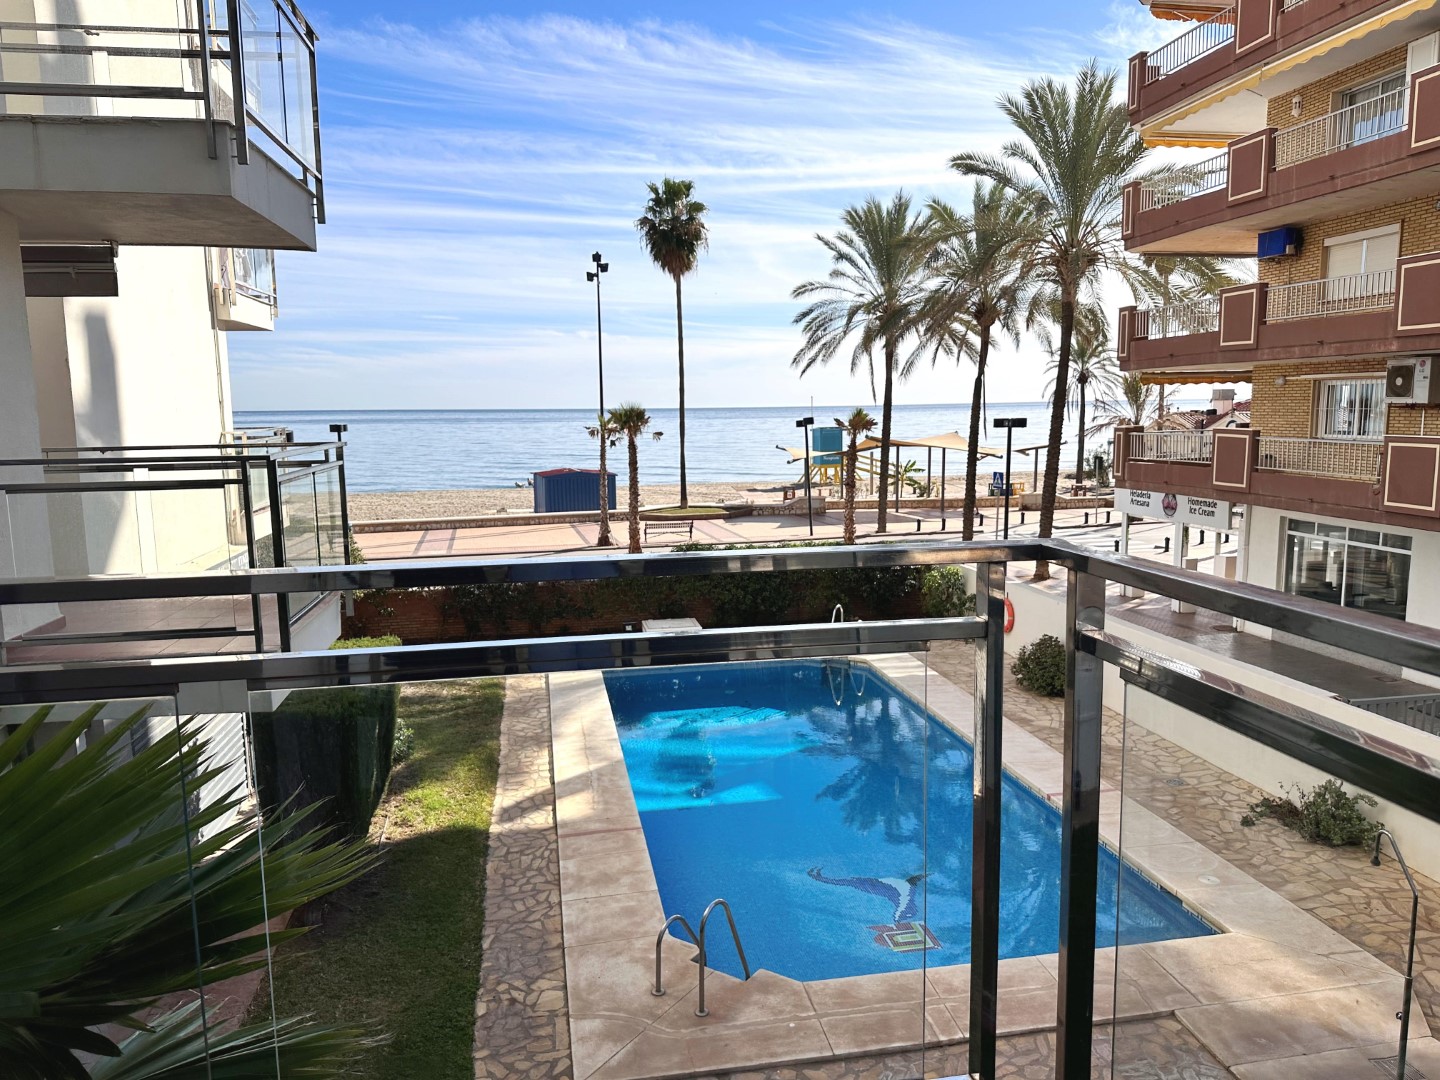 Apartment located on the Paseo Maritimo with beautiful sea views